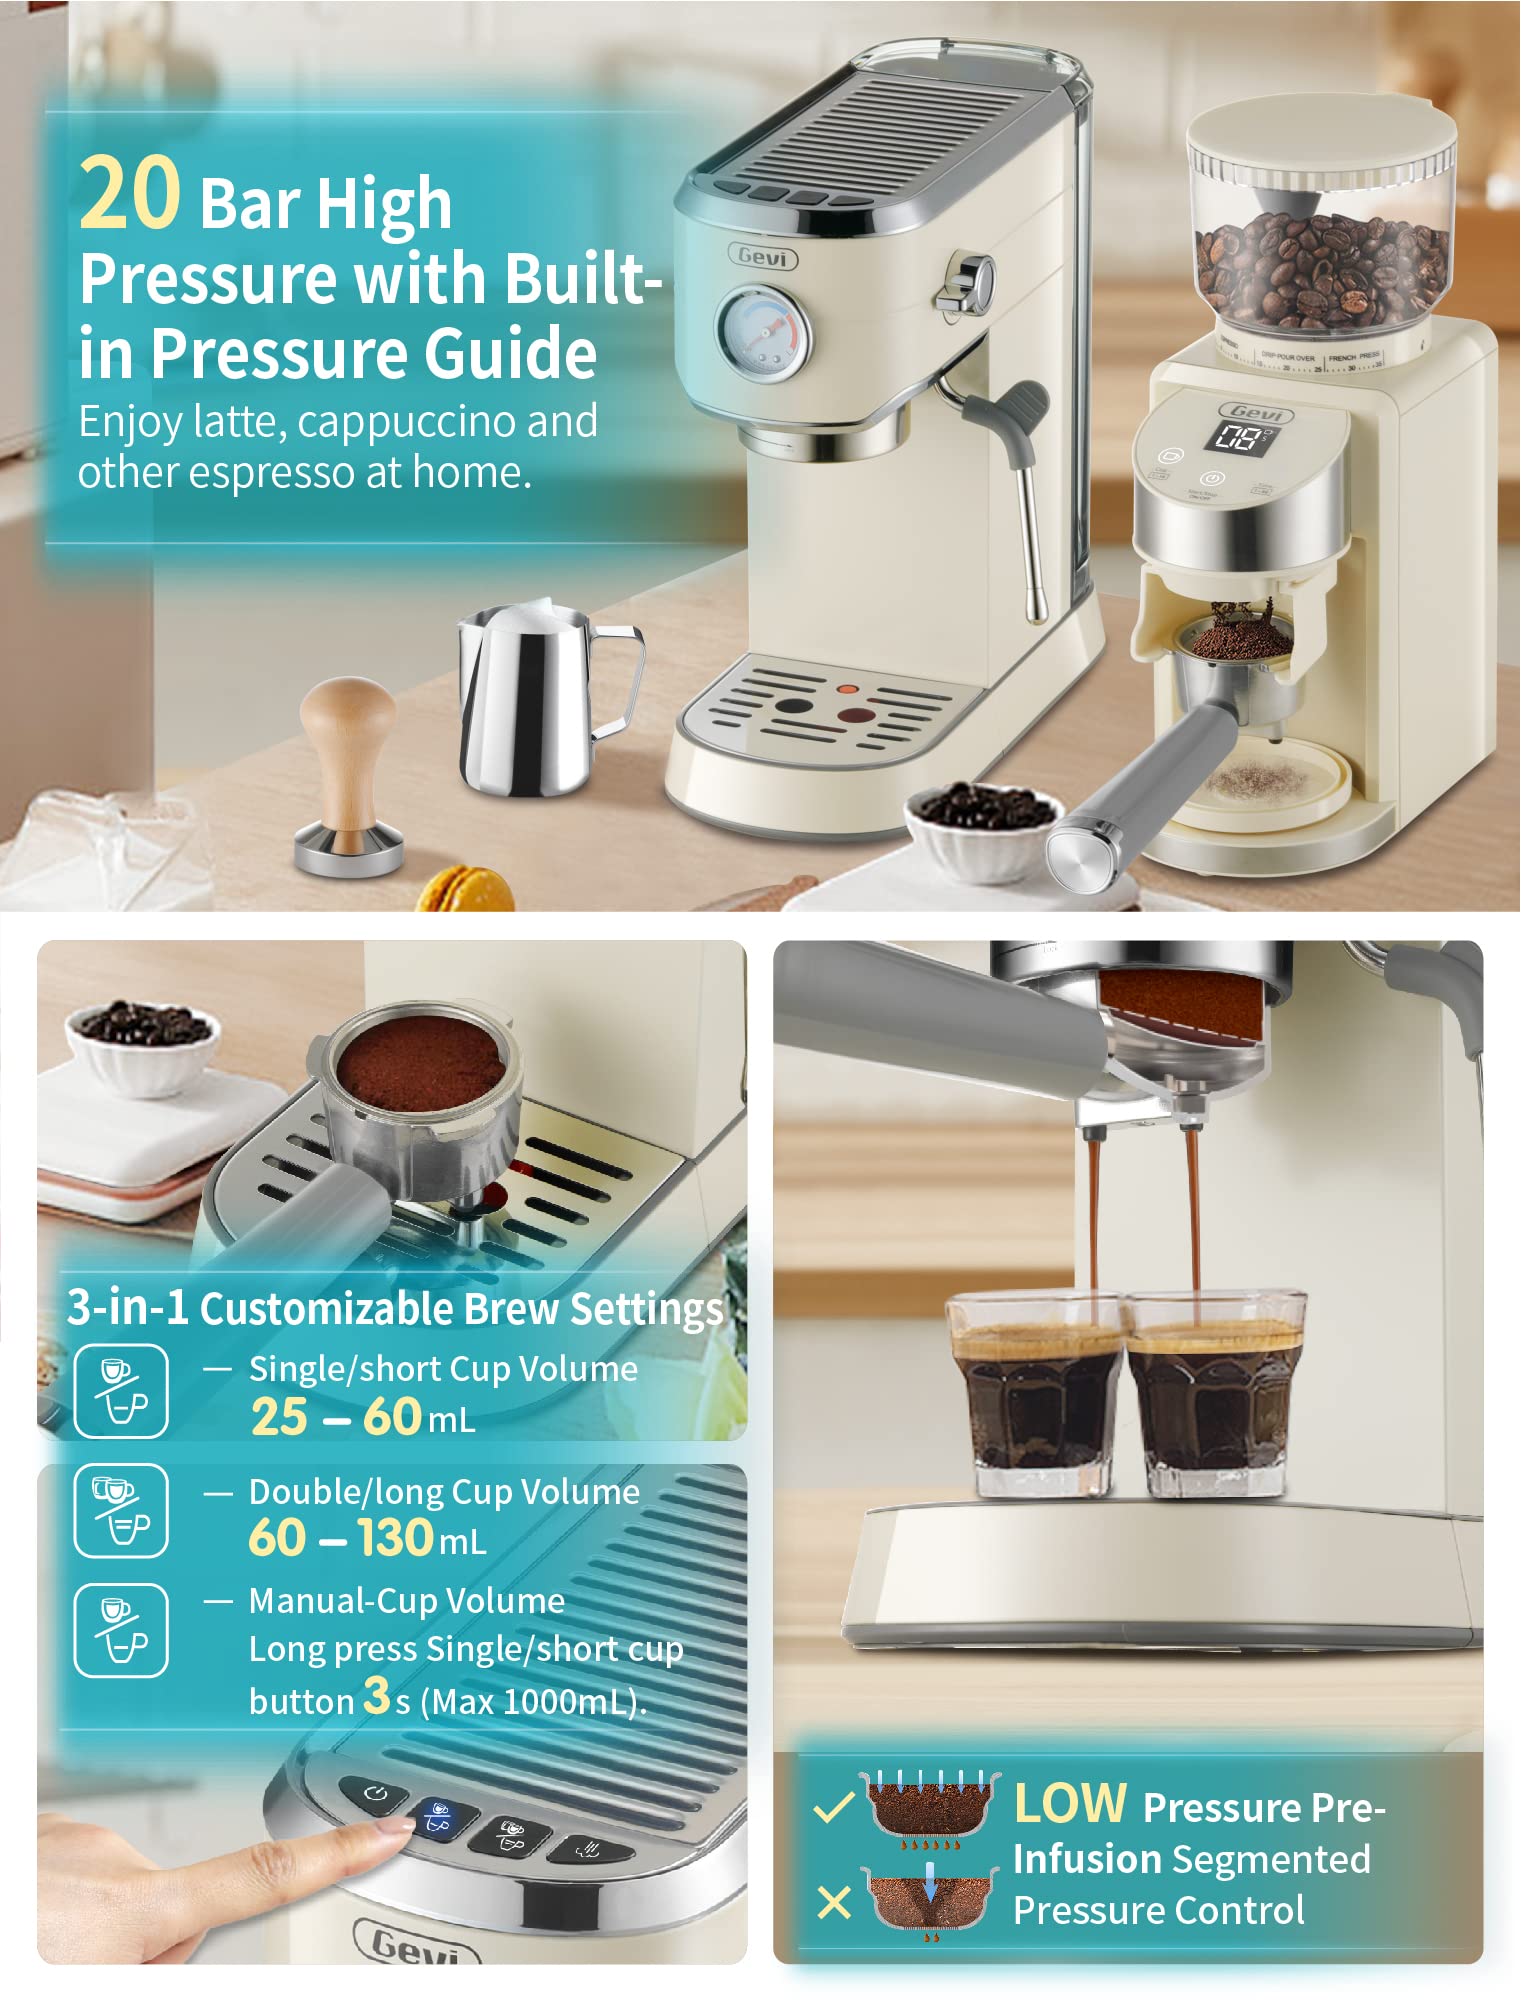 Gevi 20 Bar Compact Professional Espresso Coffee Machine with Milk Frother for Espresso, Latte and Cappuccino with Gevi Burr Coffee Grinder with 35 Precise Grind Settings, Beige